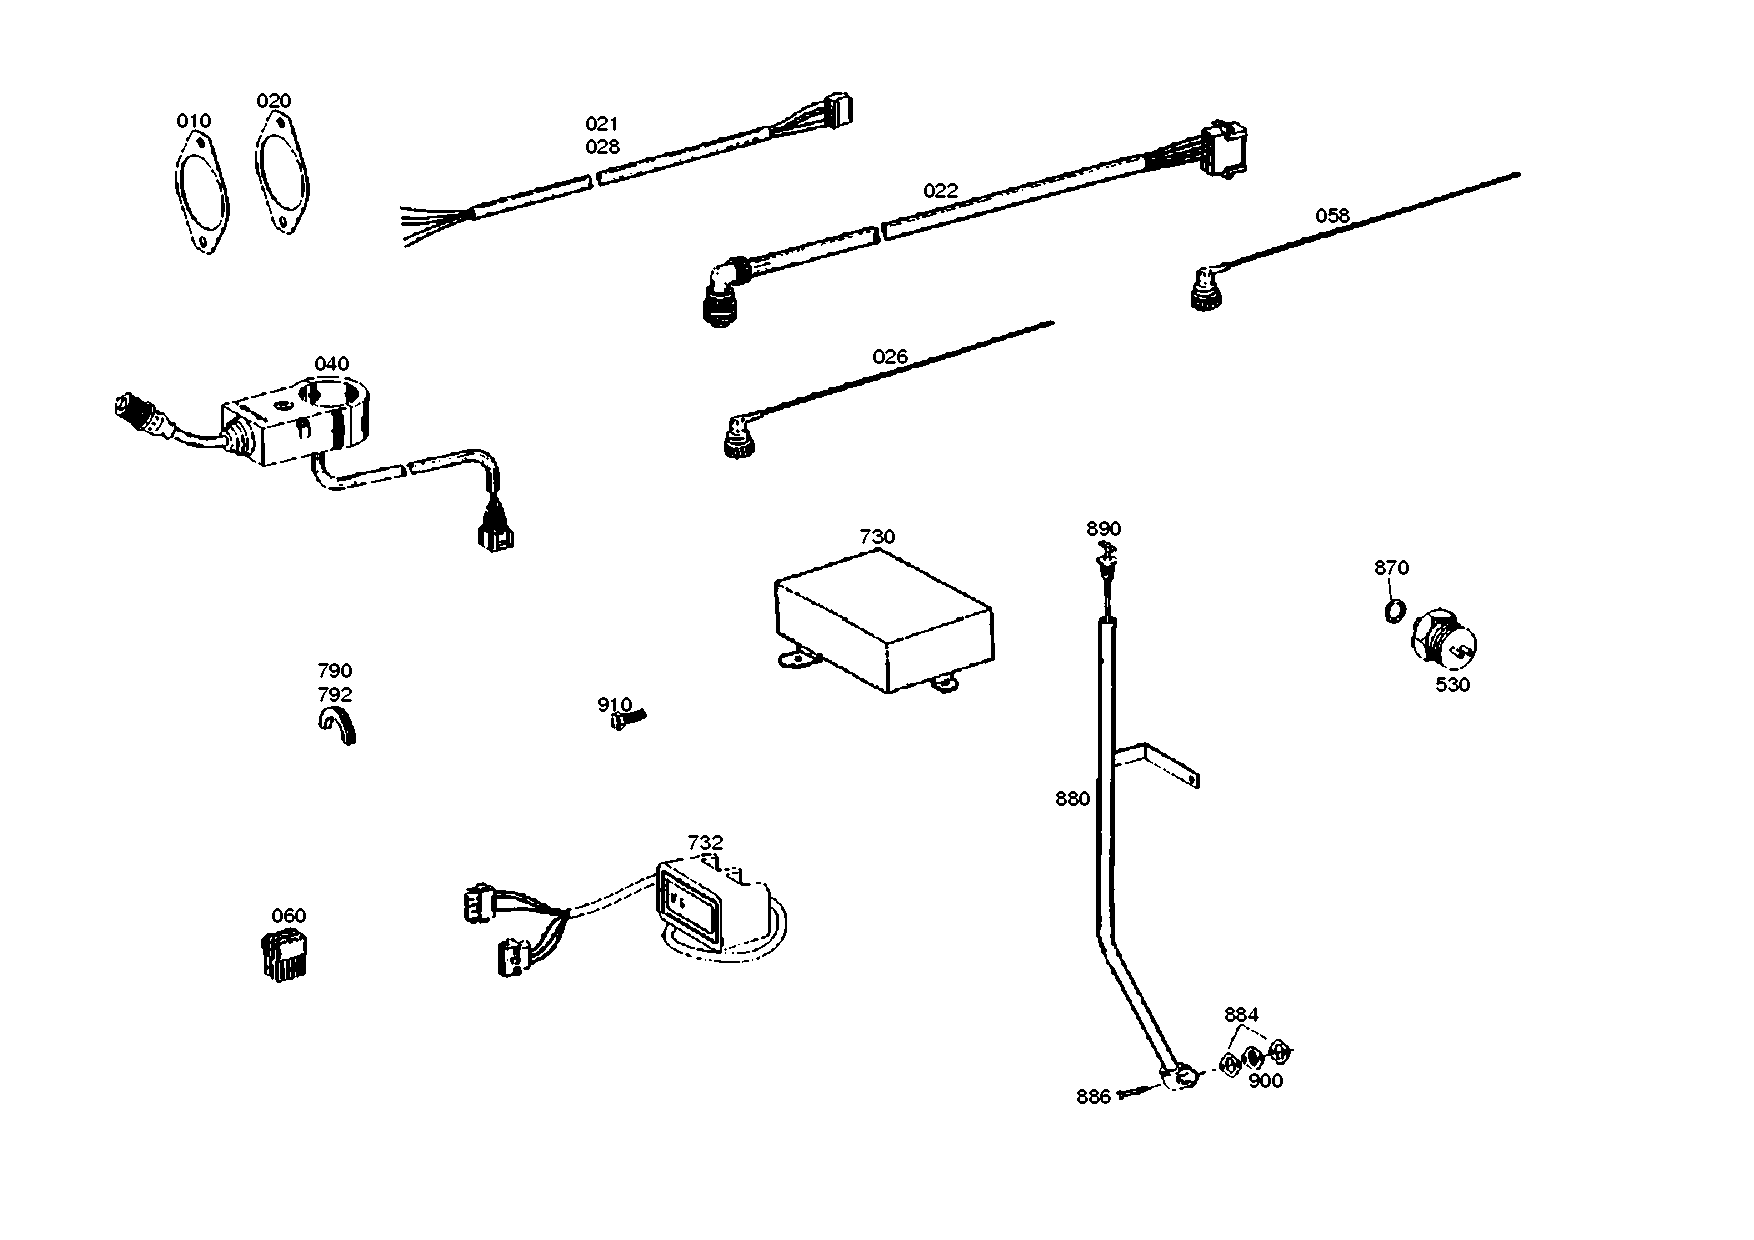 drawing for Manitowoc Crane Group Germany 02315201 - OIL LEVEL TUBE (figure 1)